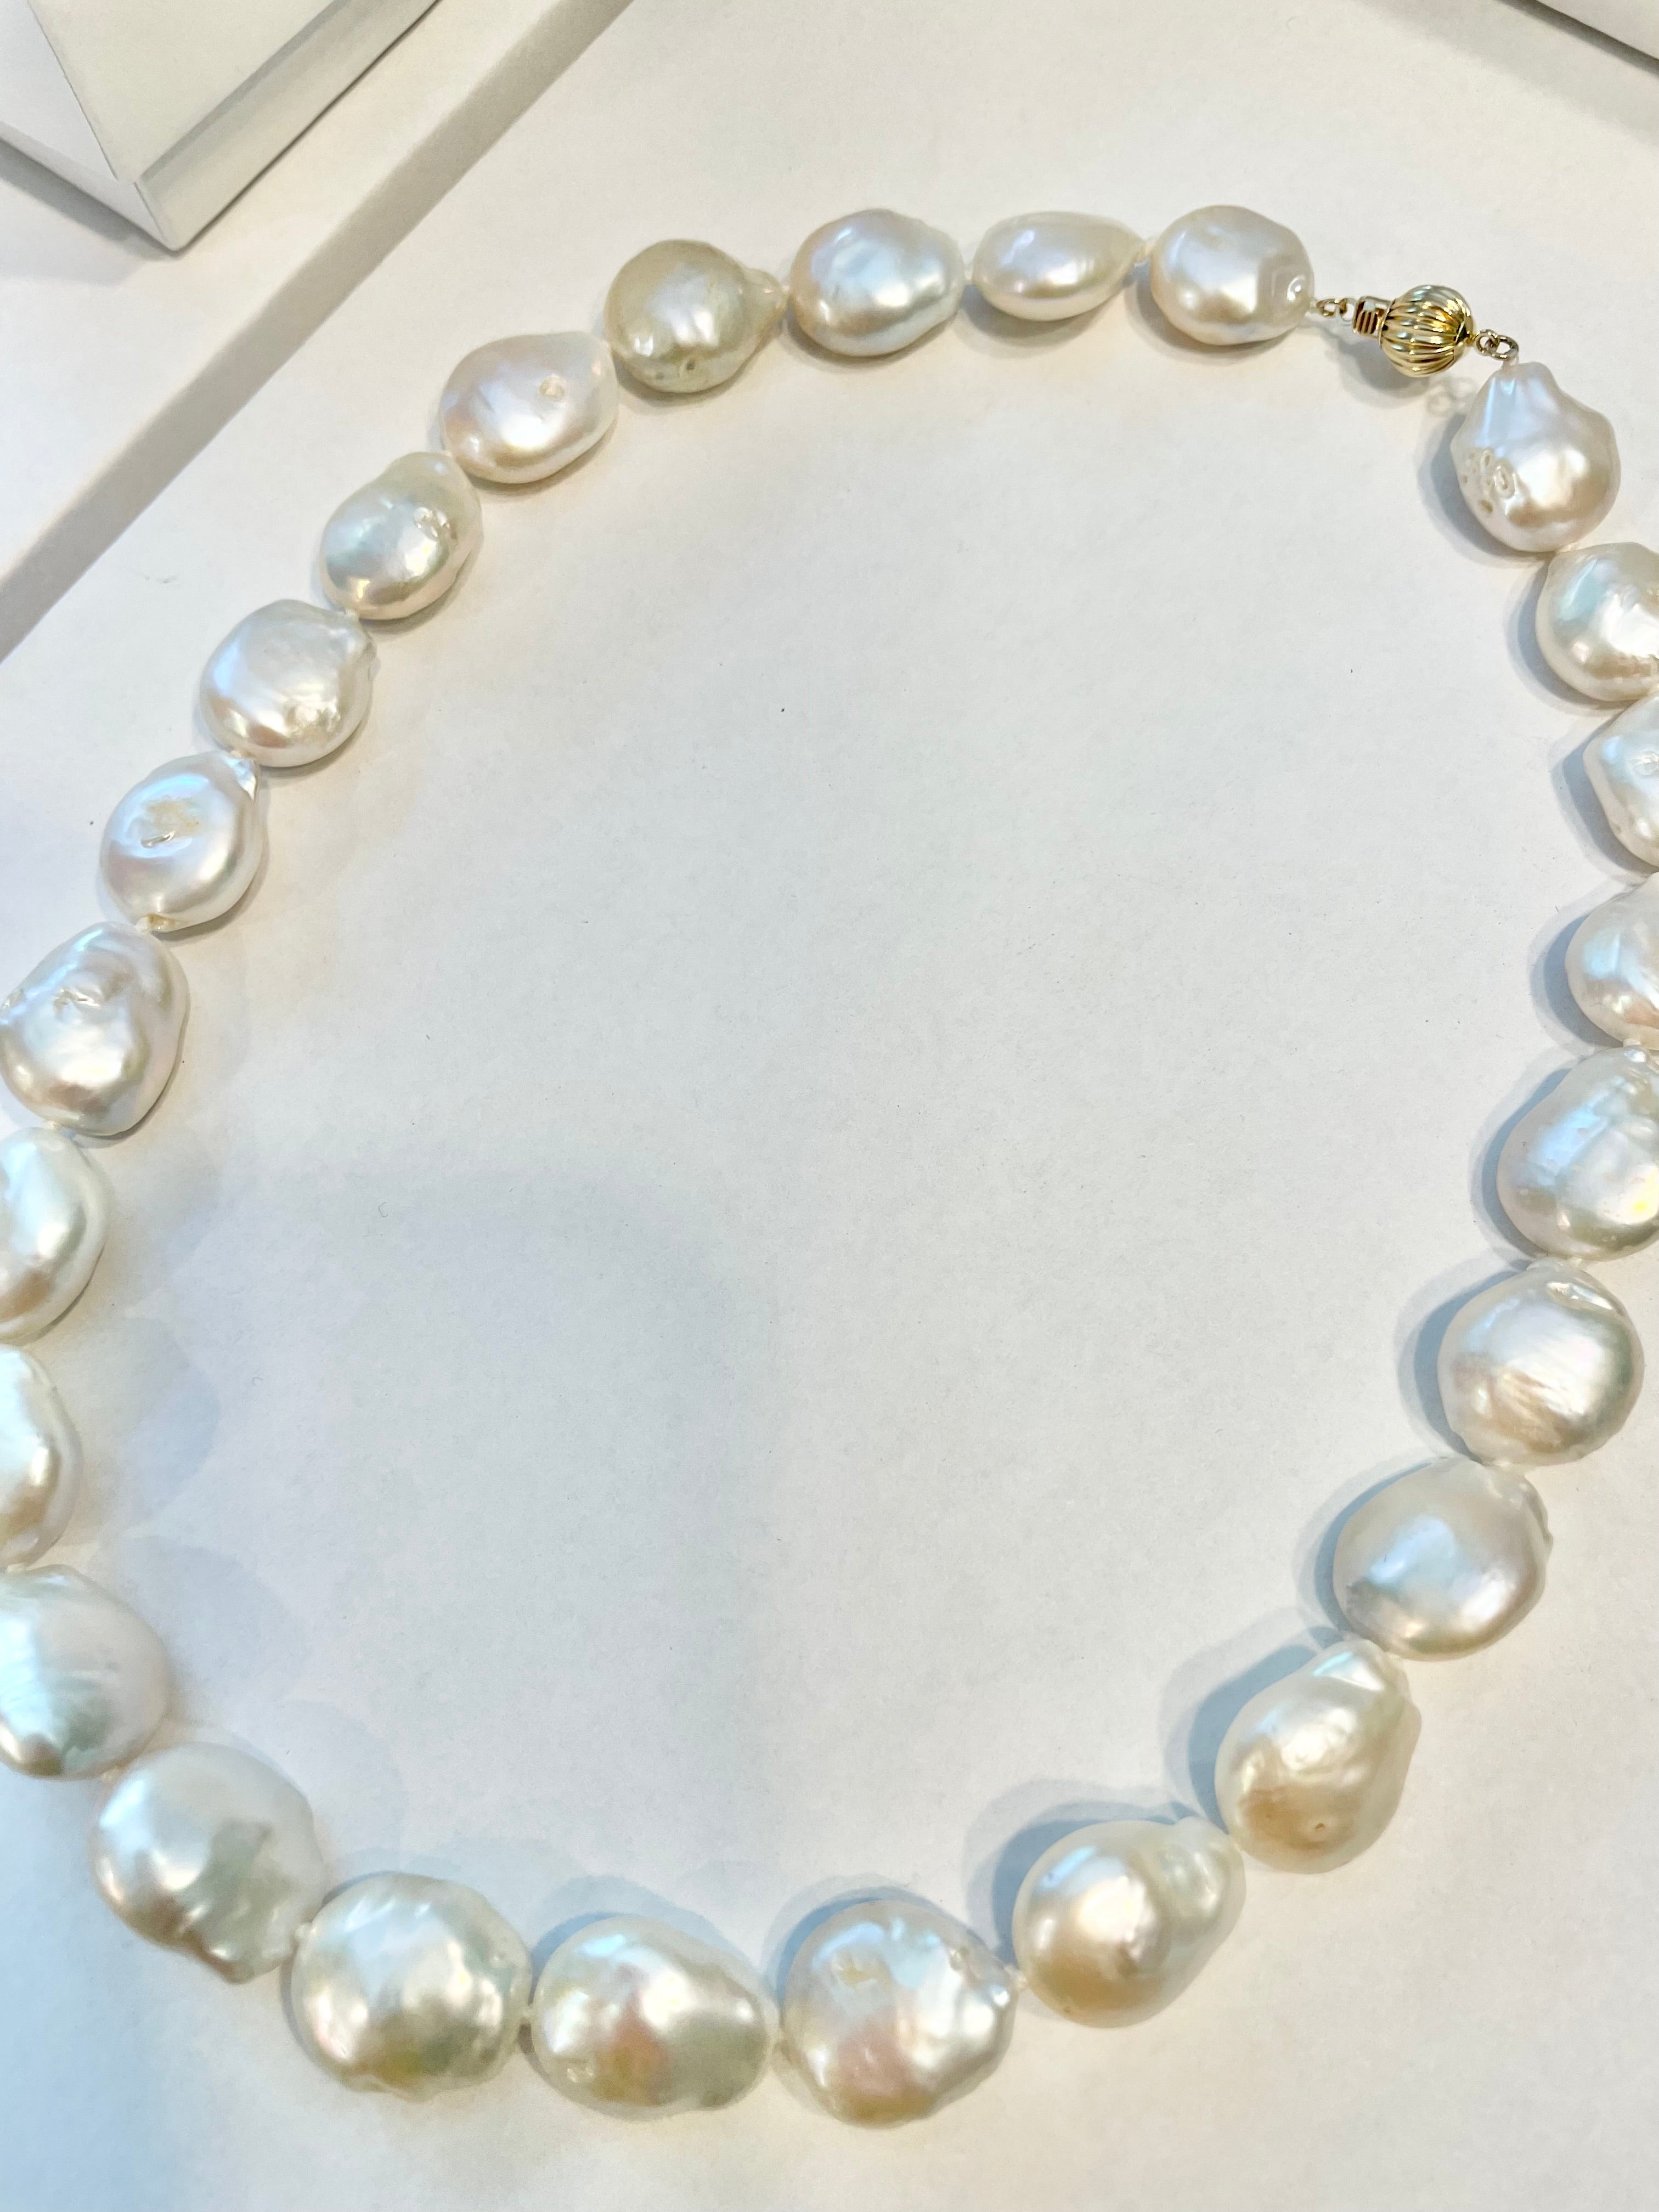 Isn't she Charming!!! This extraordinary genuine baroque fresh water pearls is a true classic for any lady to adore!